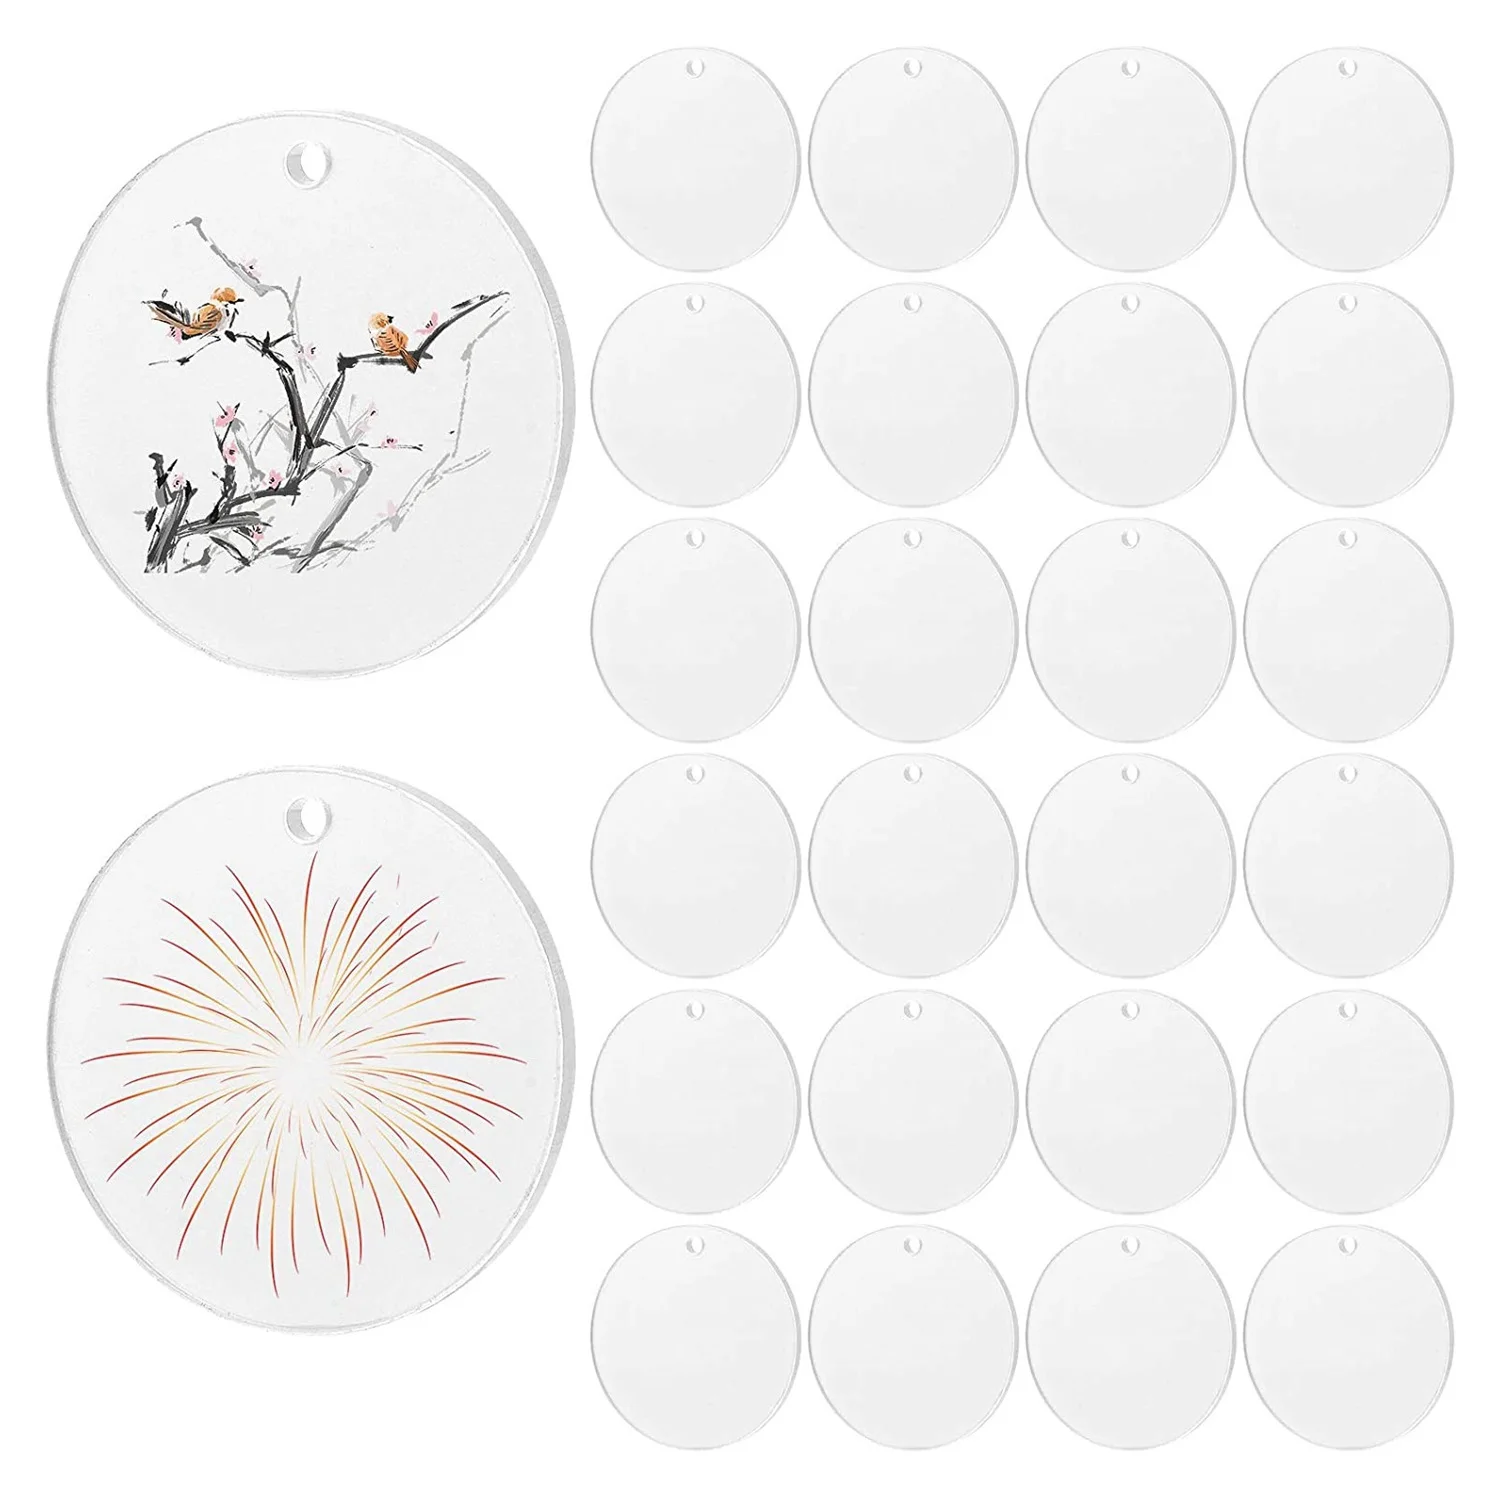 

100 Pcs Acrylic Discs Round Keychain Blanks Transparent Circle Discs Clear Blank Key Chains for DIY Decoration